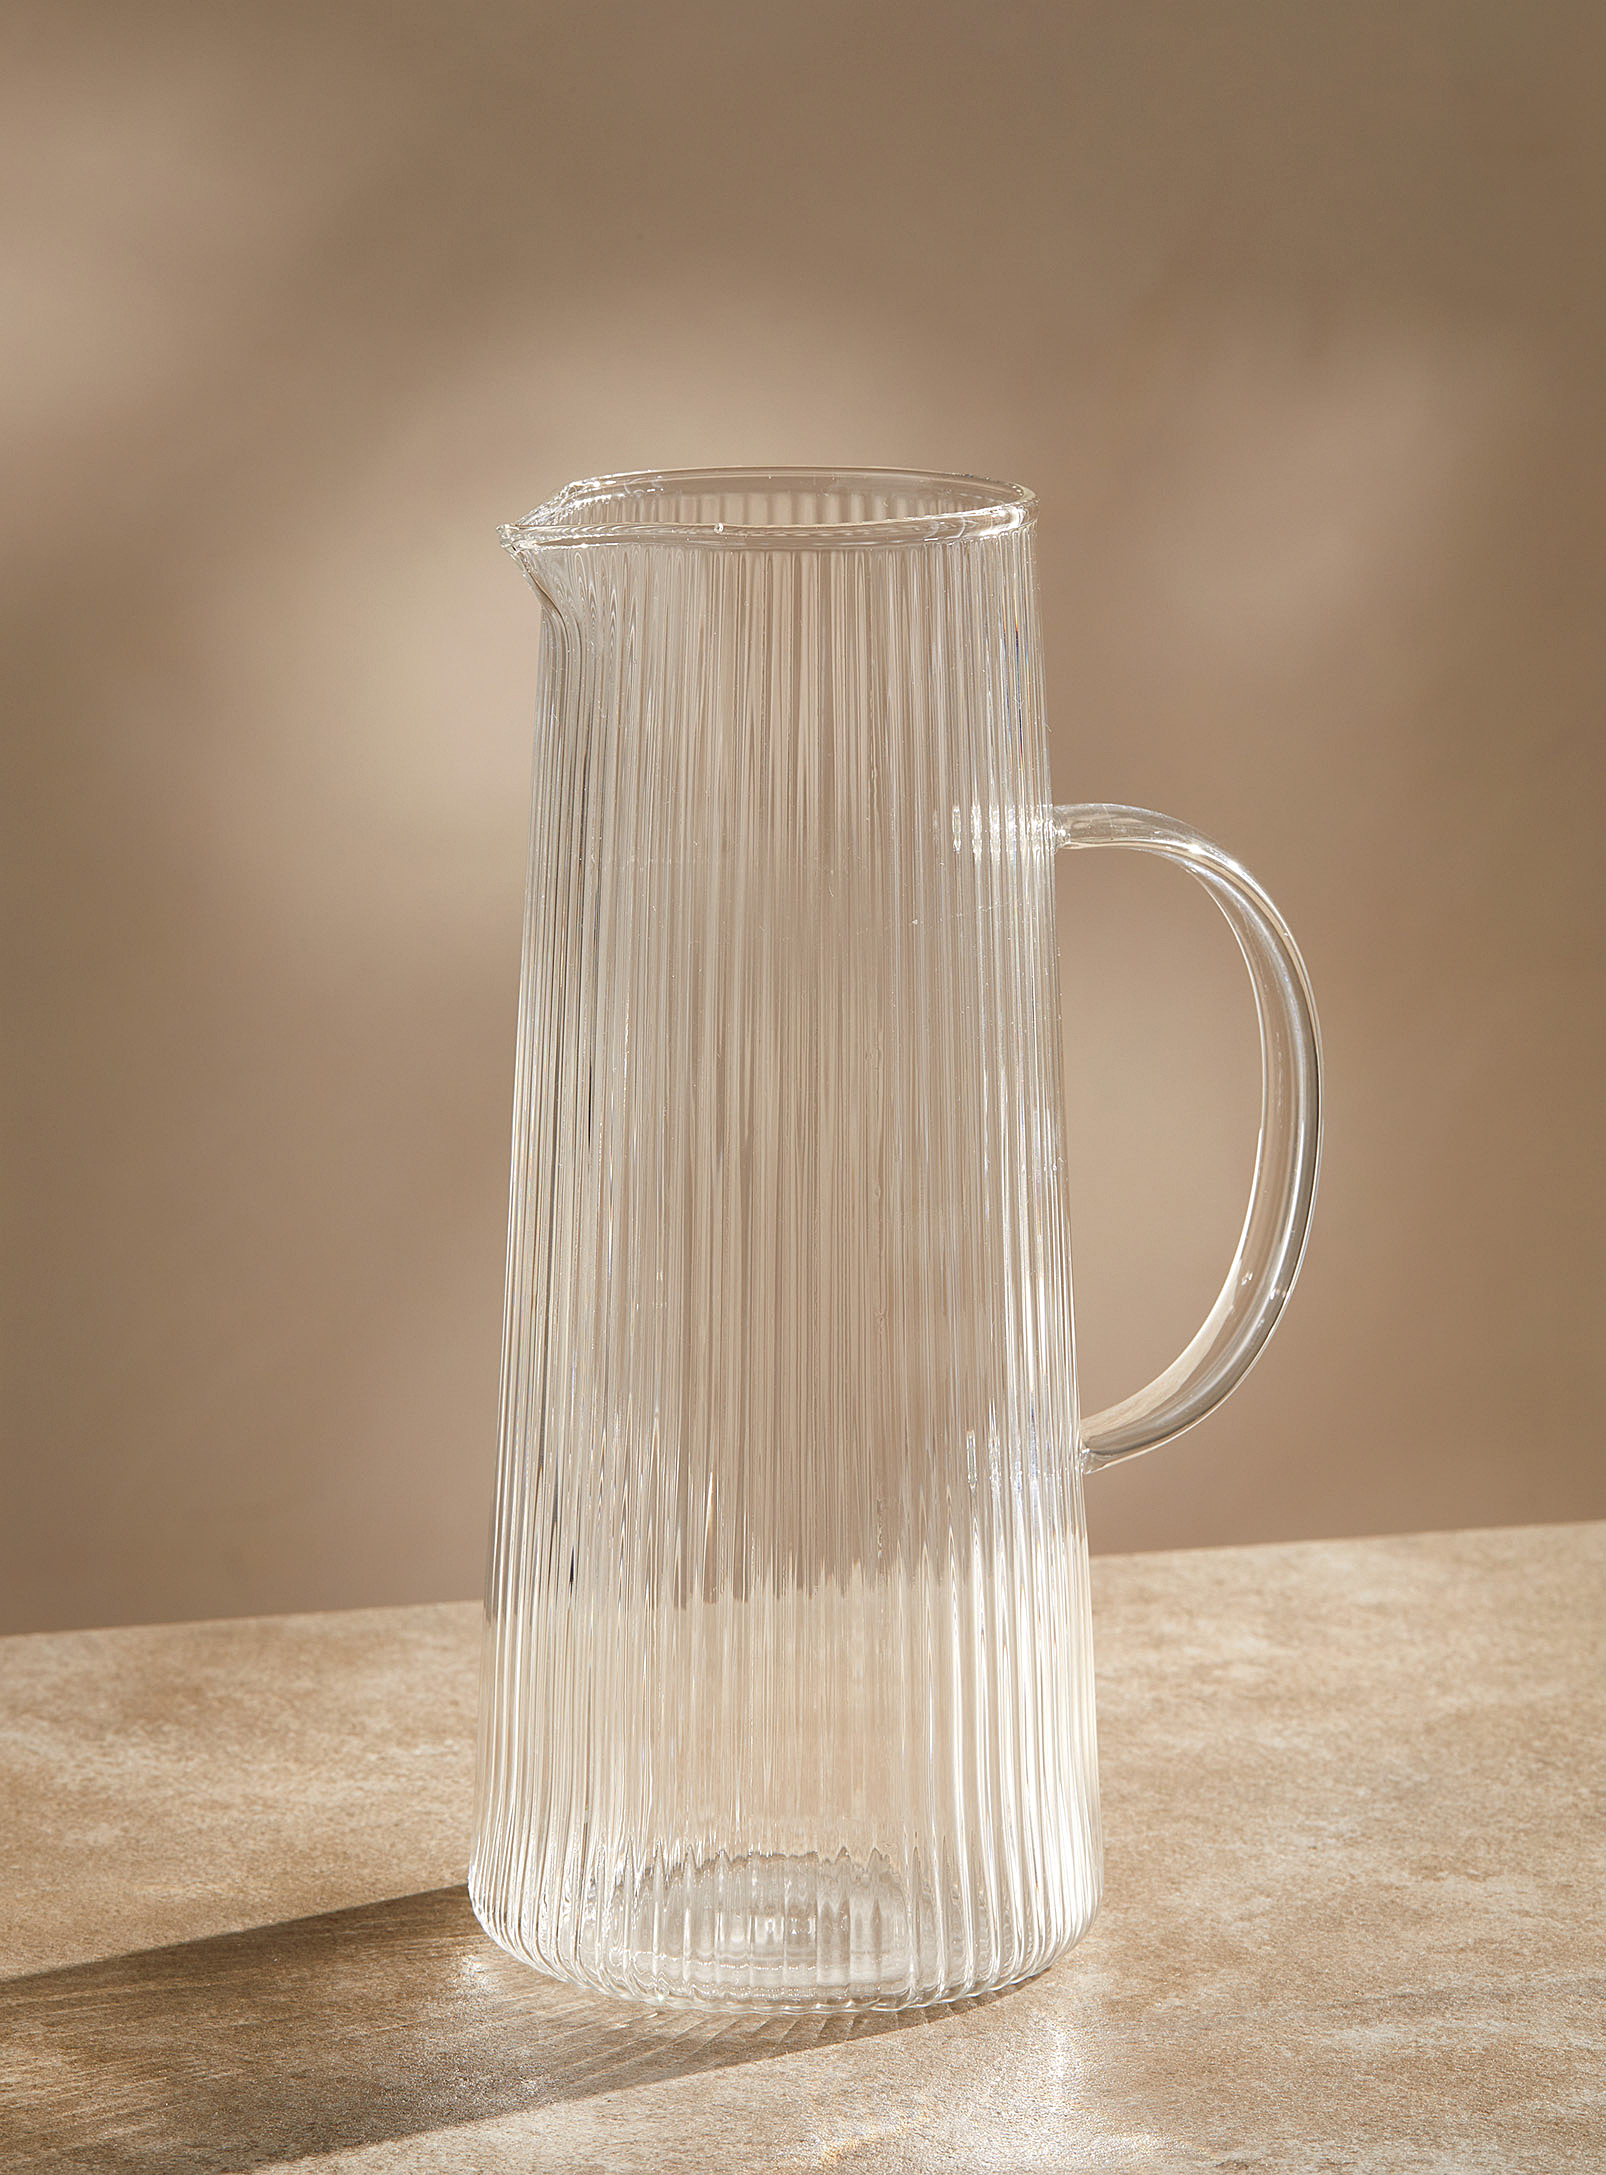 Simons Maison - Fine grooved pitcher